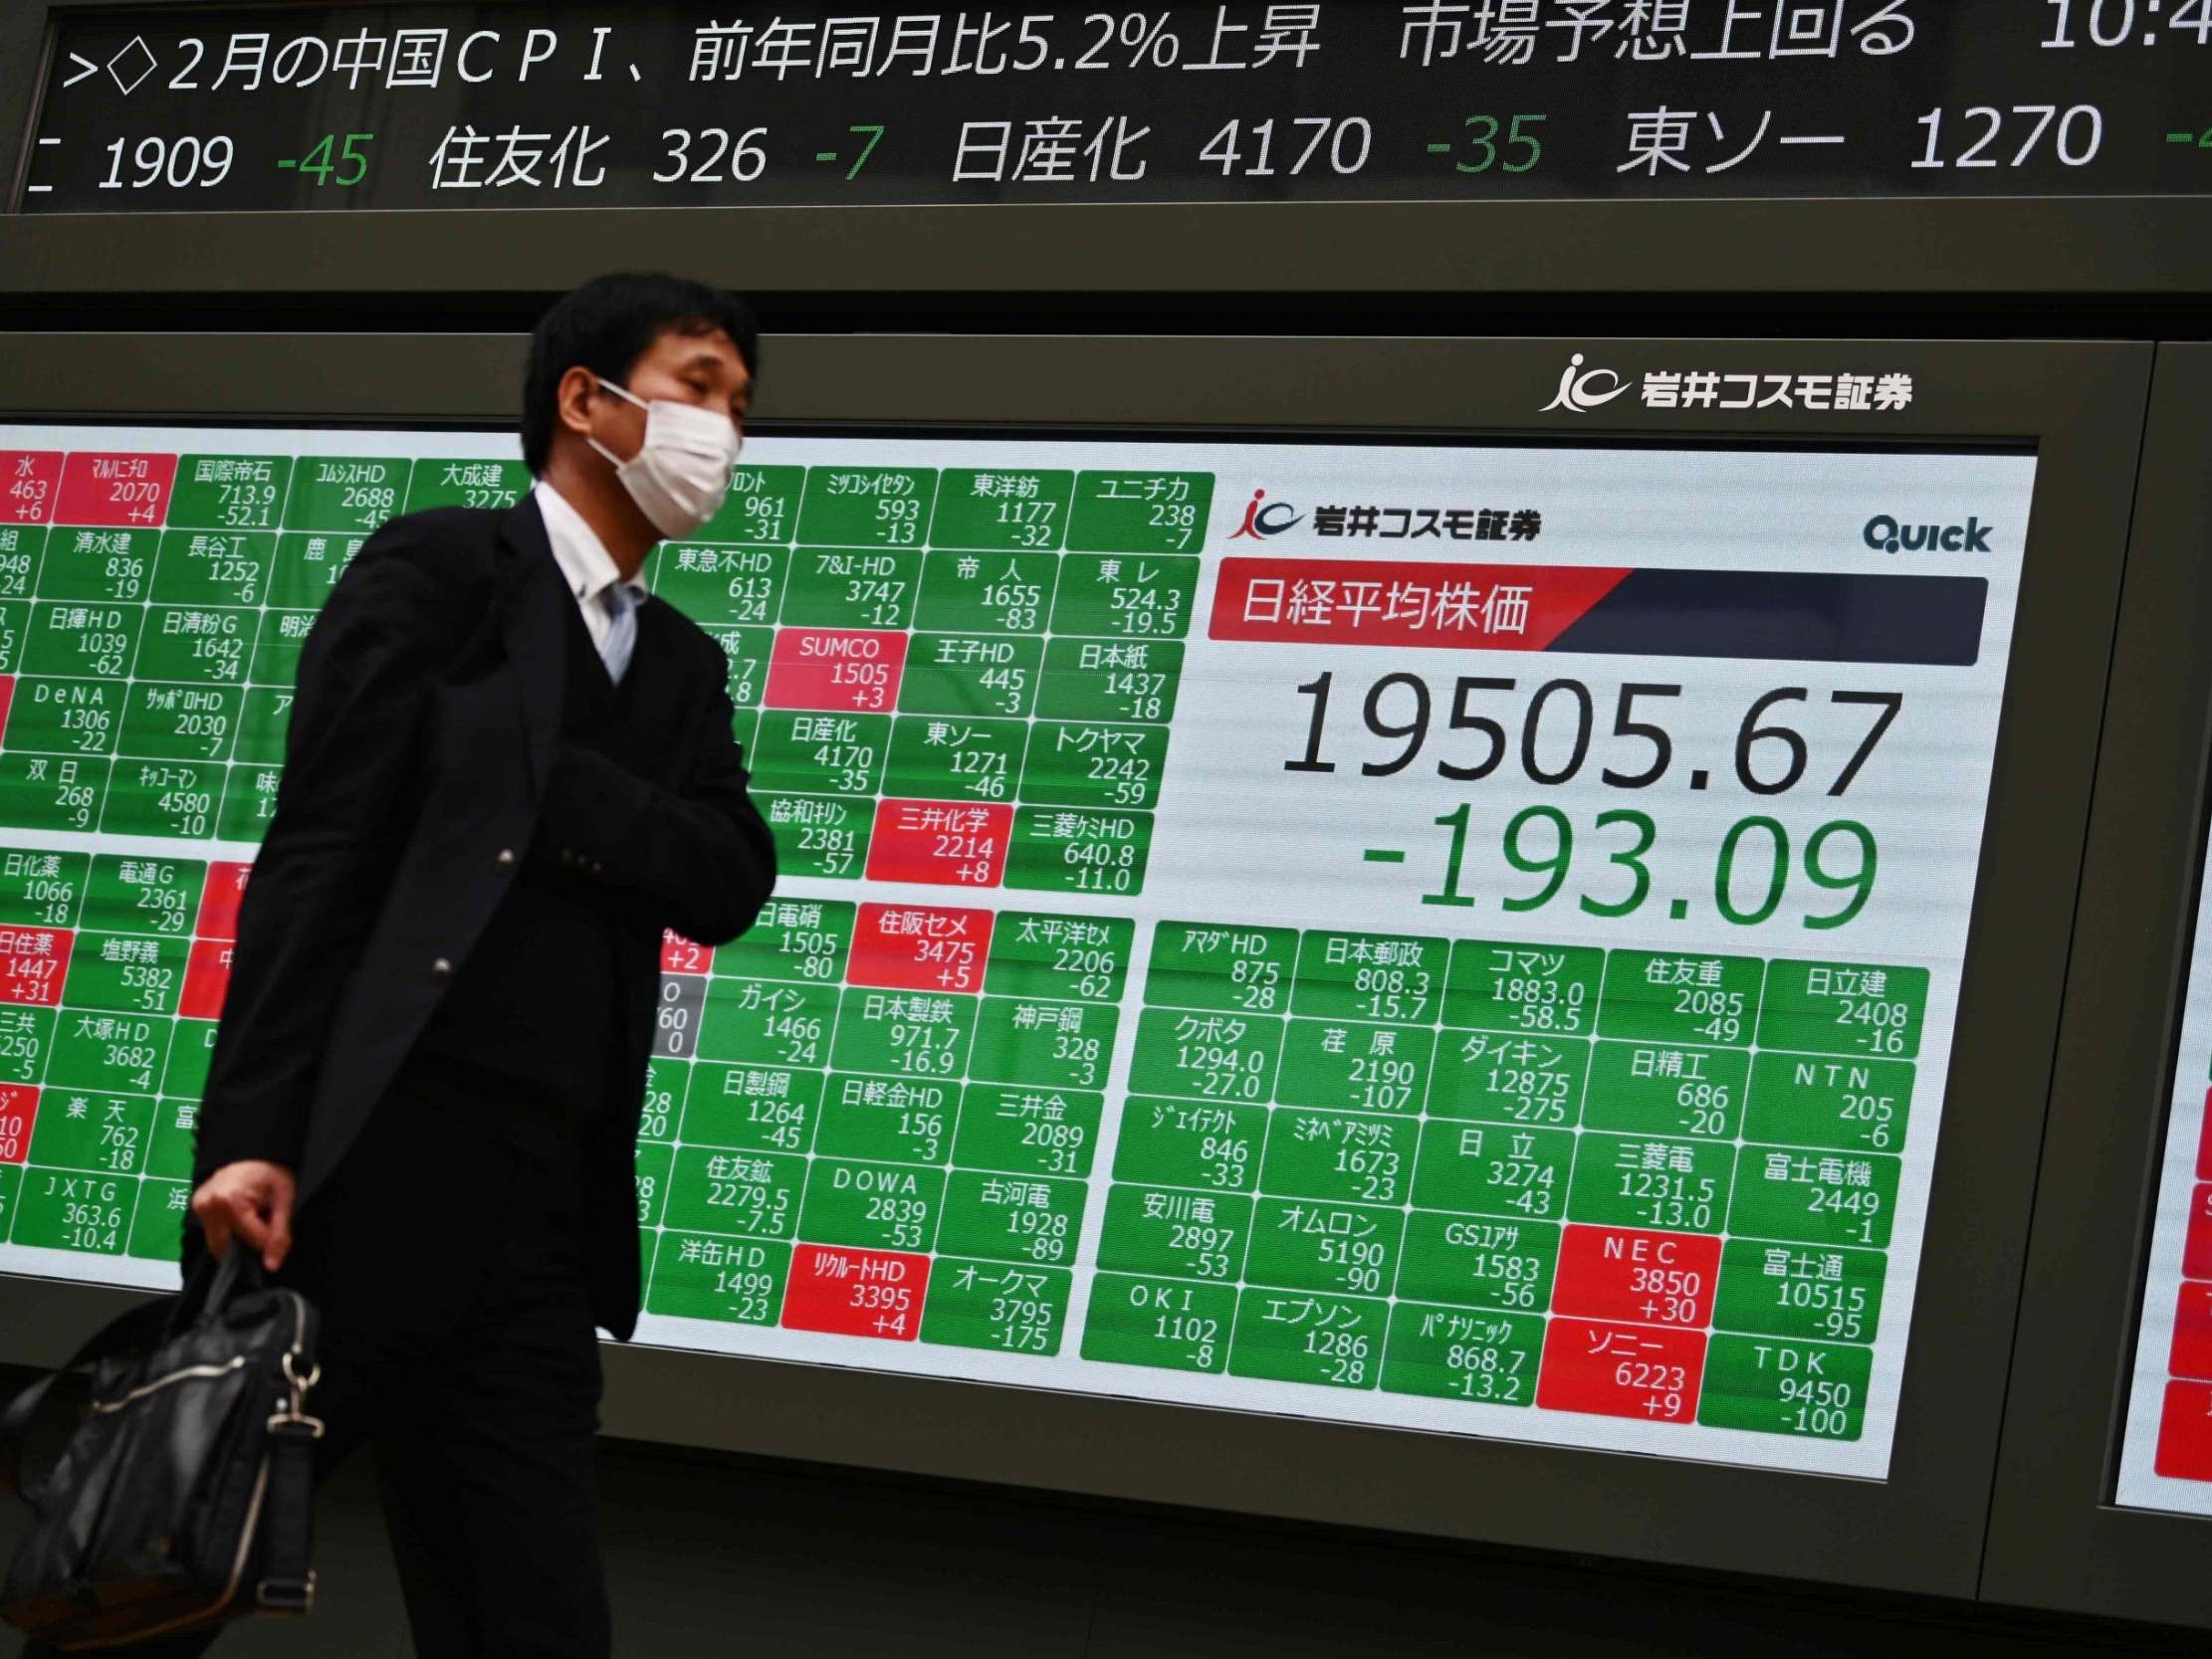 A mask-clad pedestrian passes in front of a quotation board displaying the share price numbers of the Tokyo Stock Exchange